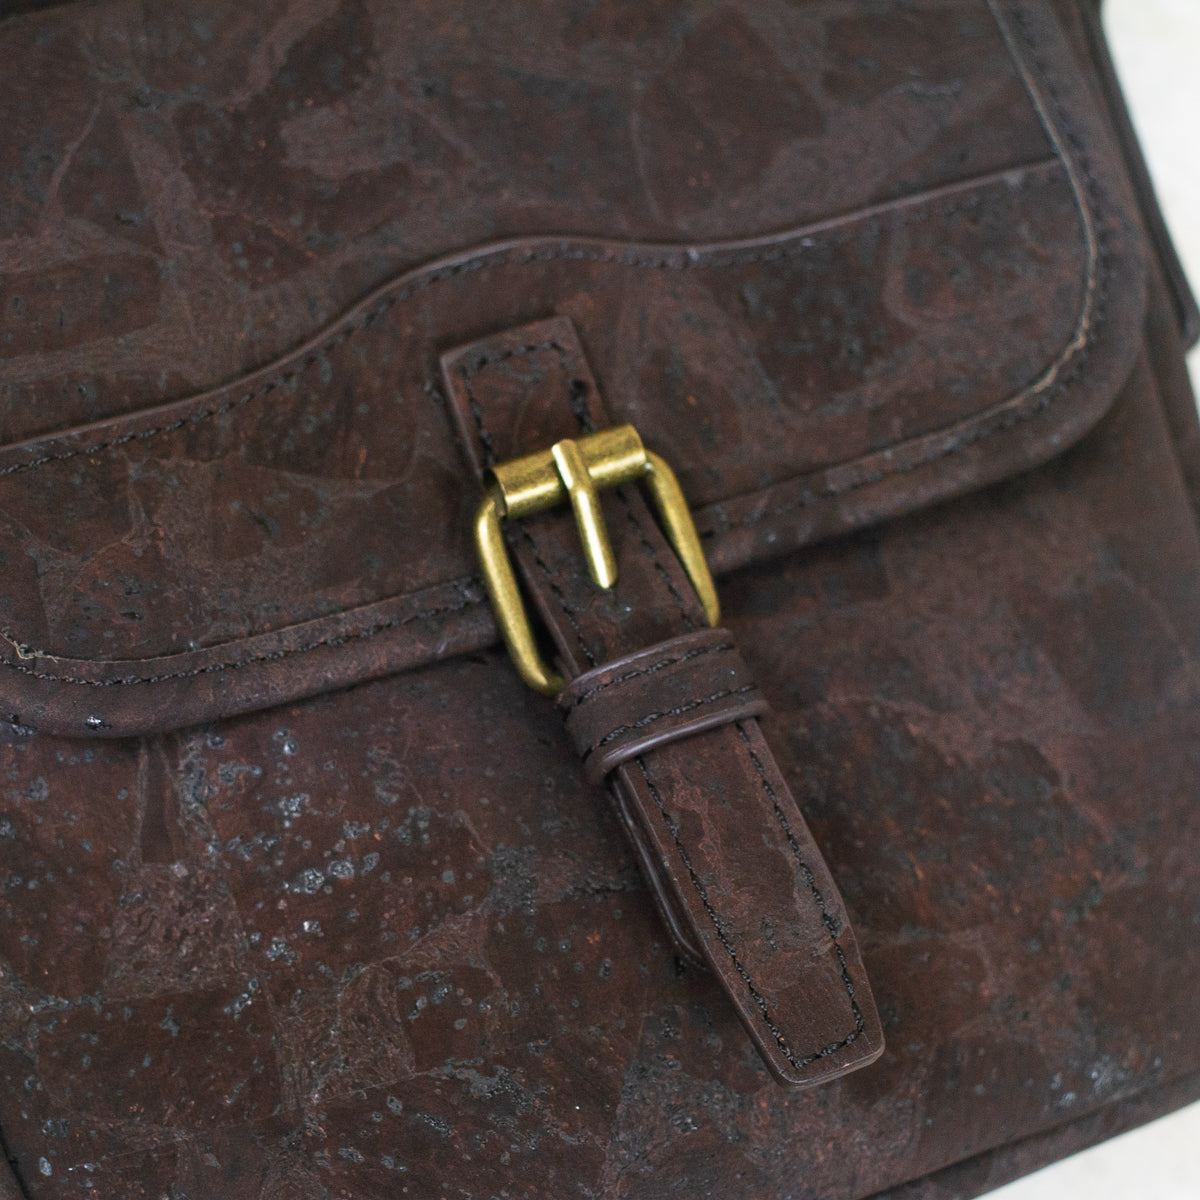 Natural Cork Men's Crossbody Bag w/ Magnetic Closure in Black & Brown | THE CORK COLLECTION